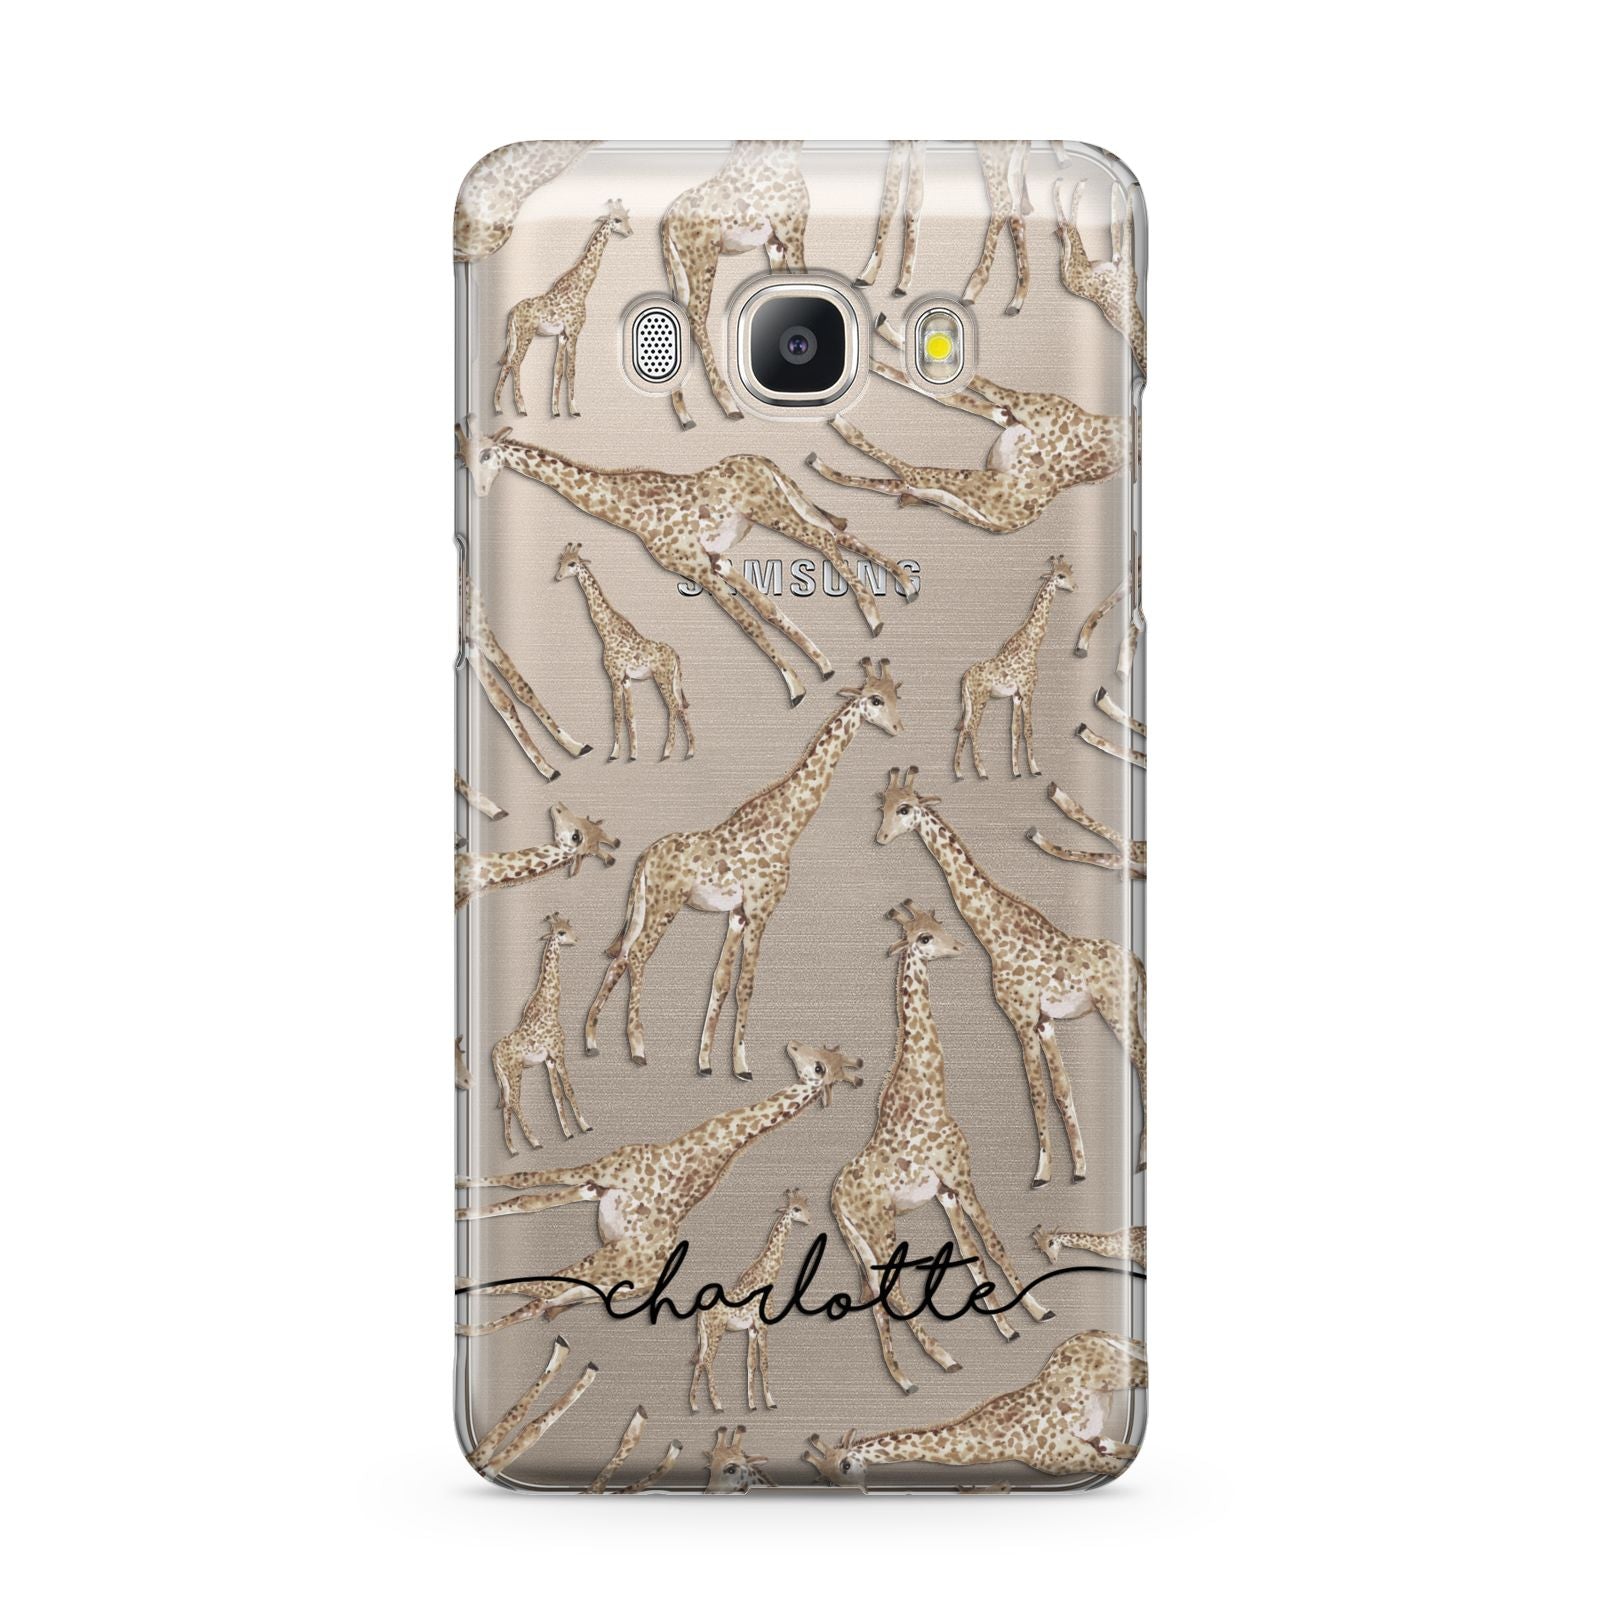 Personalised Giraffes with Name Samsung Galaxy J5 2016 Case